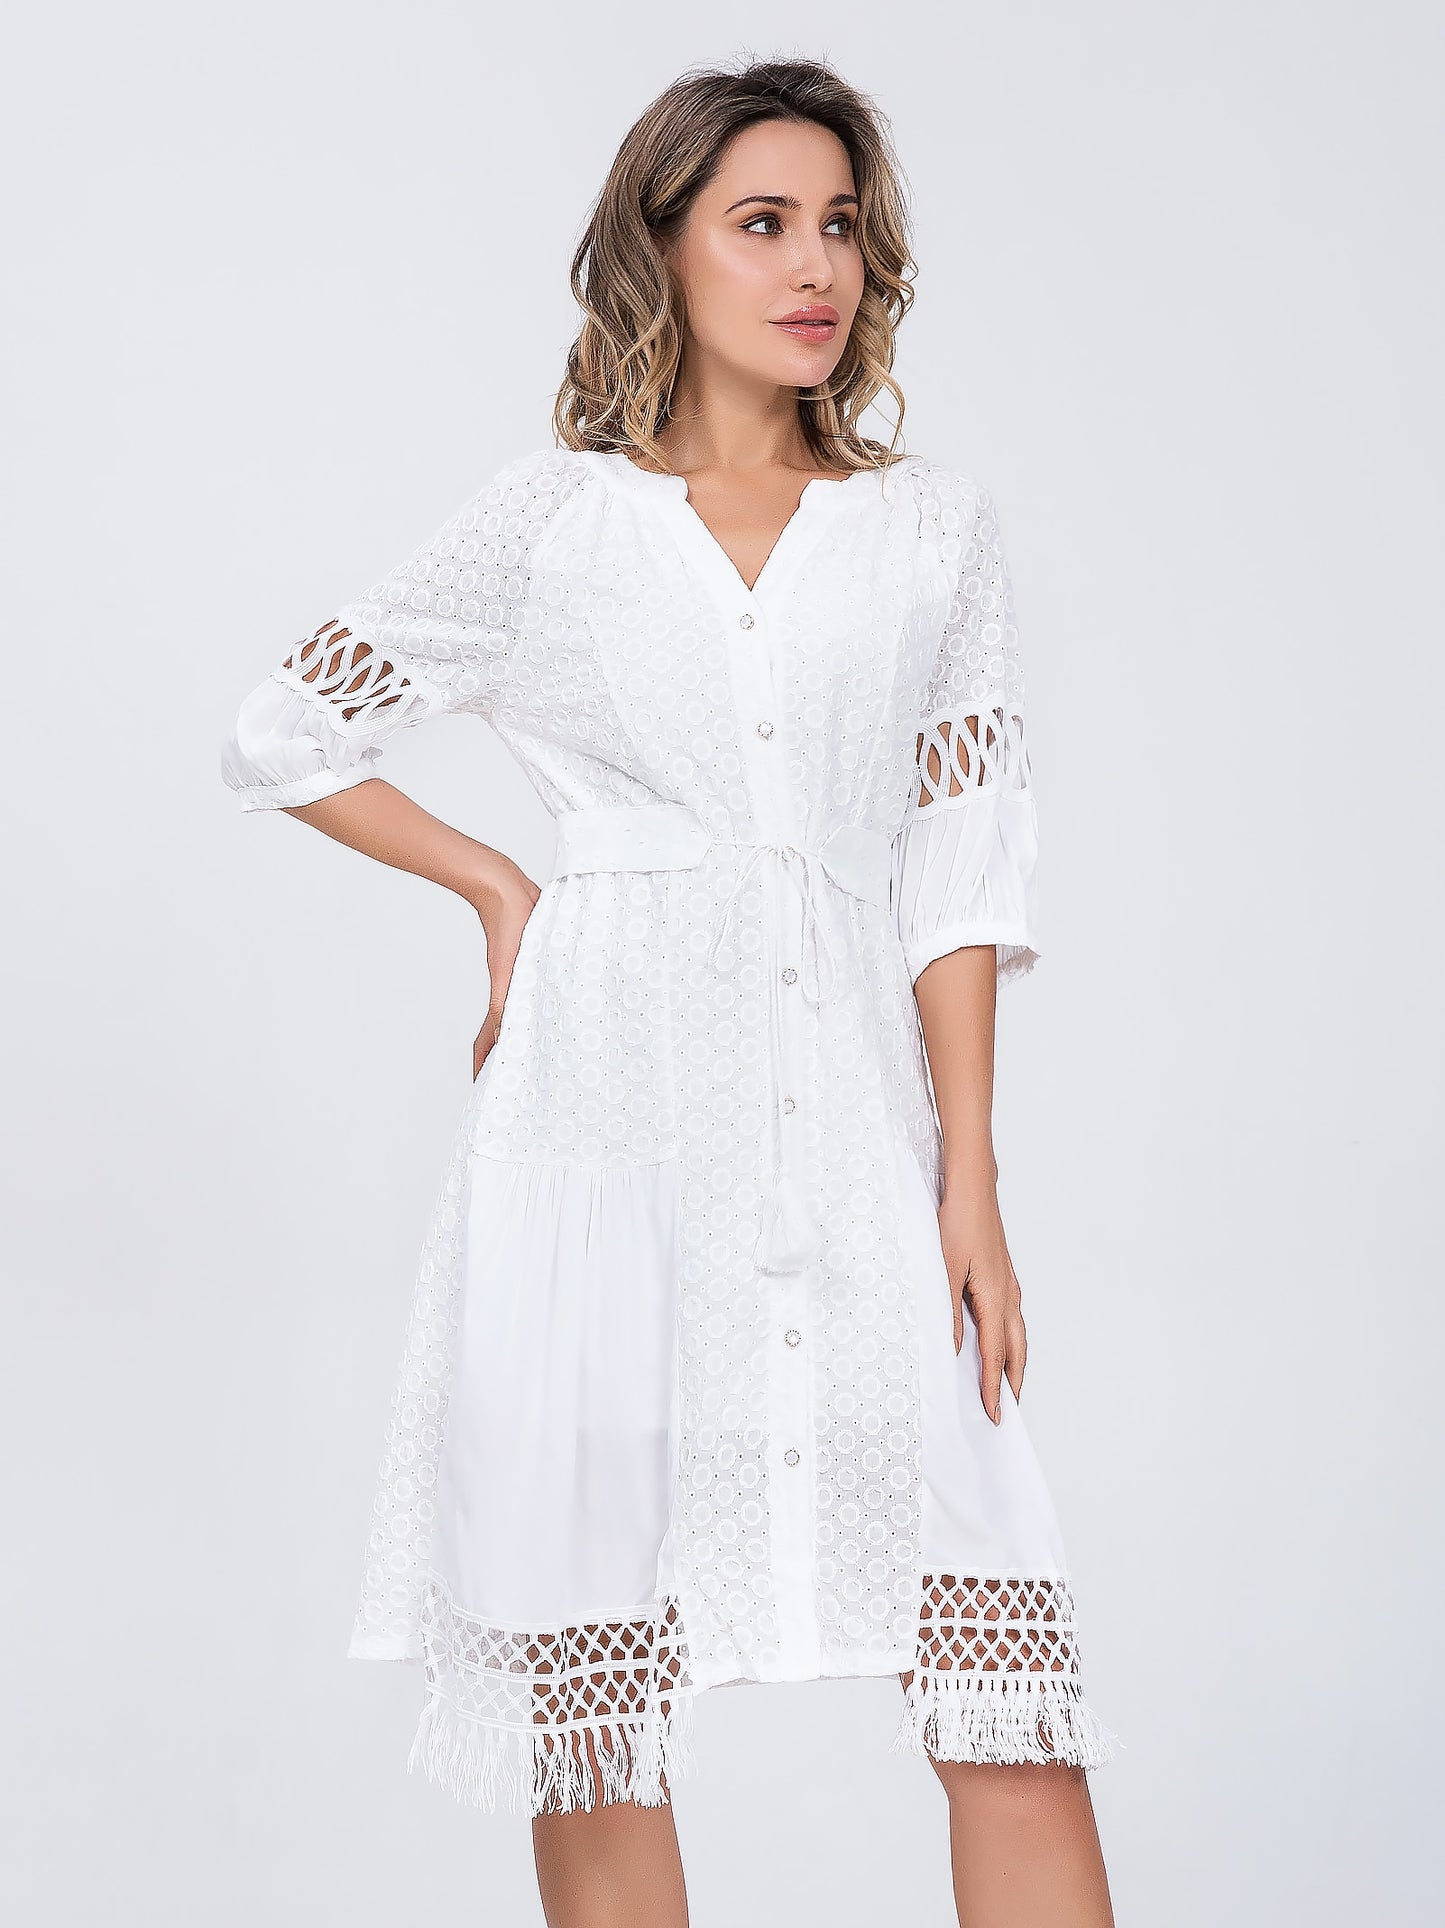 Women Cotton Lace up Hollow out Summer White A-line dress - WD8189